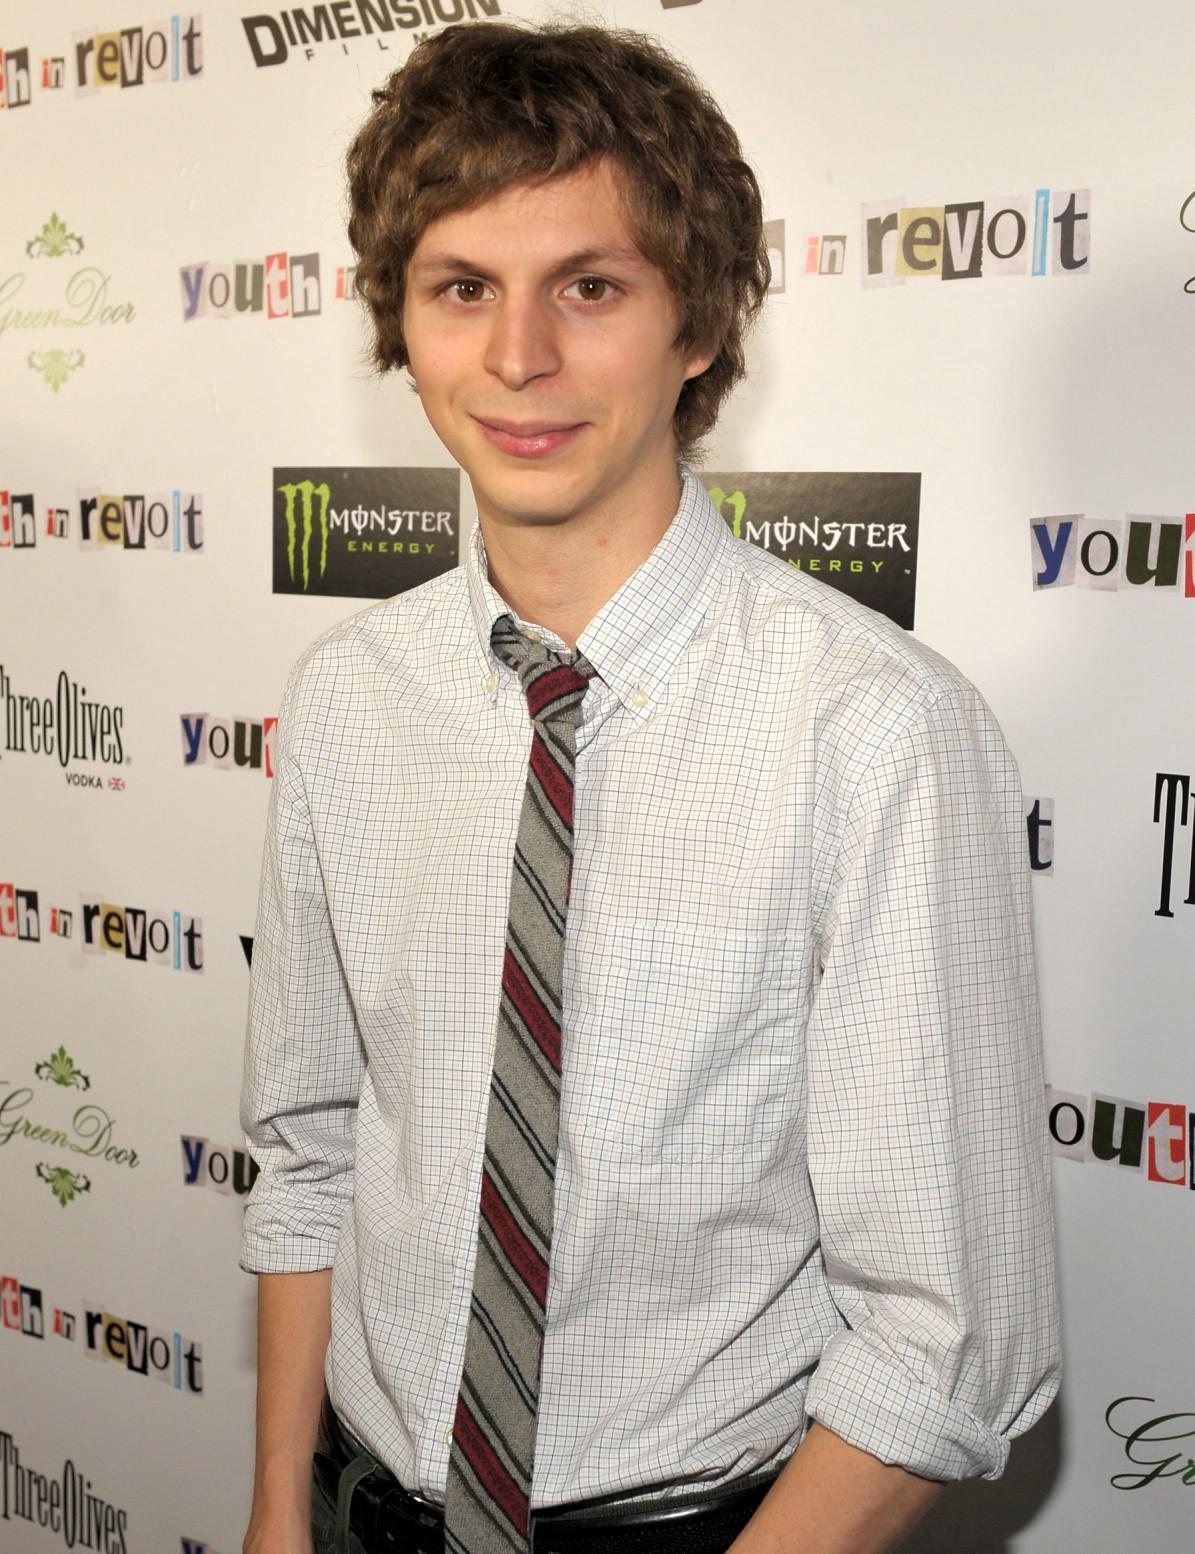 Fany Things up: MICHAEL CERA!!